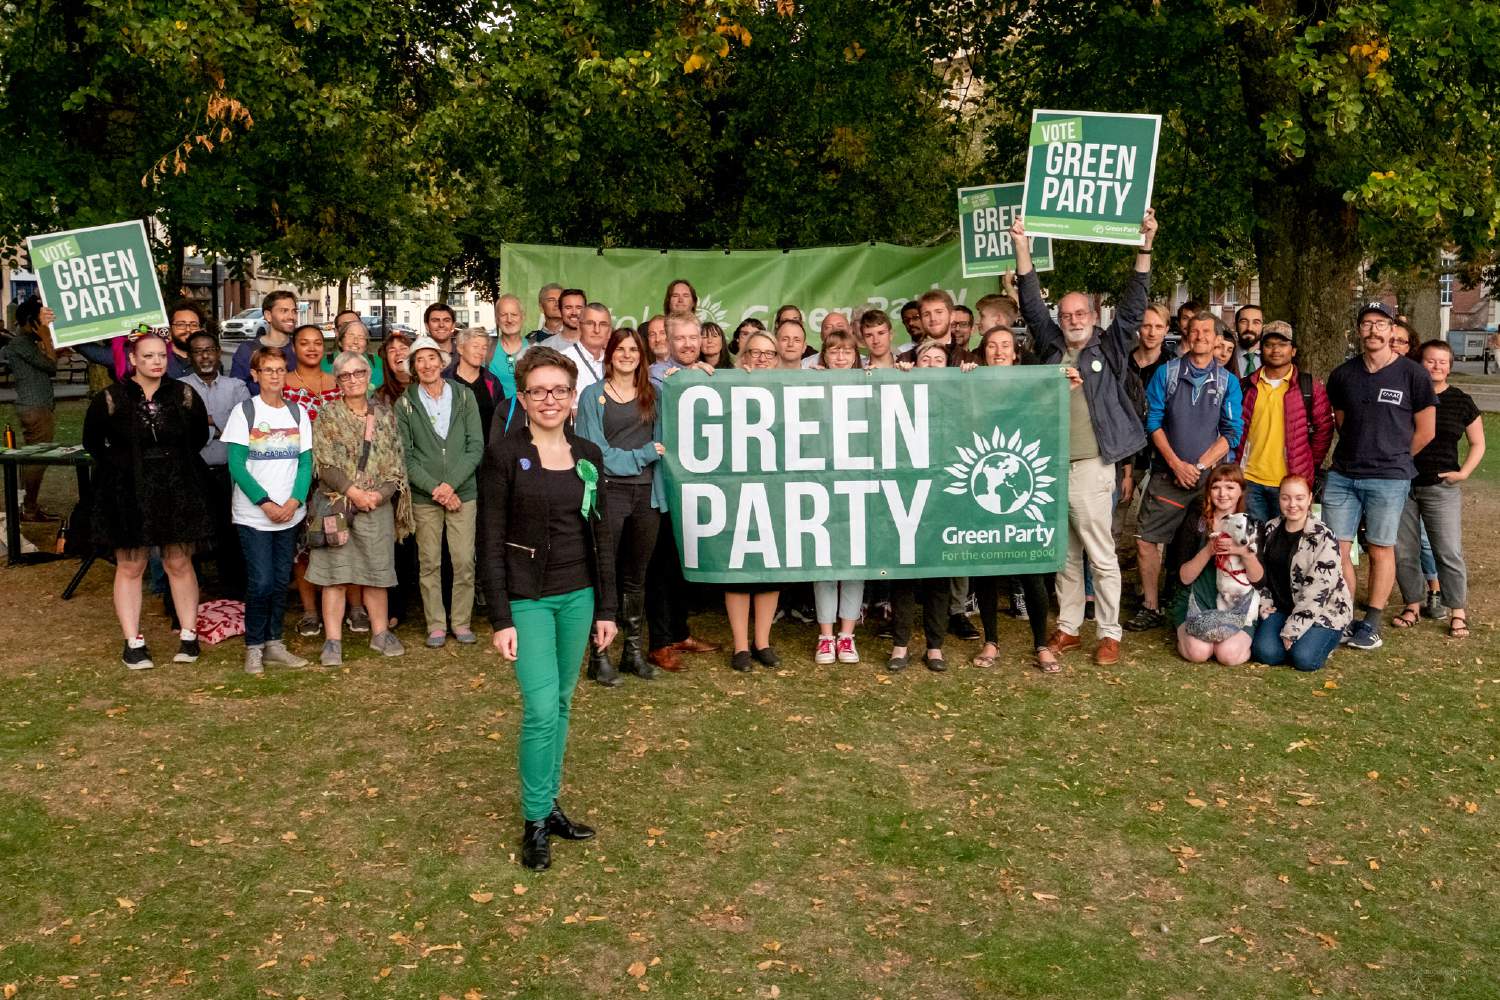 Can the Green Party build on their recent local election success?